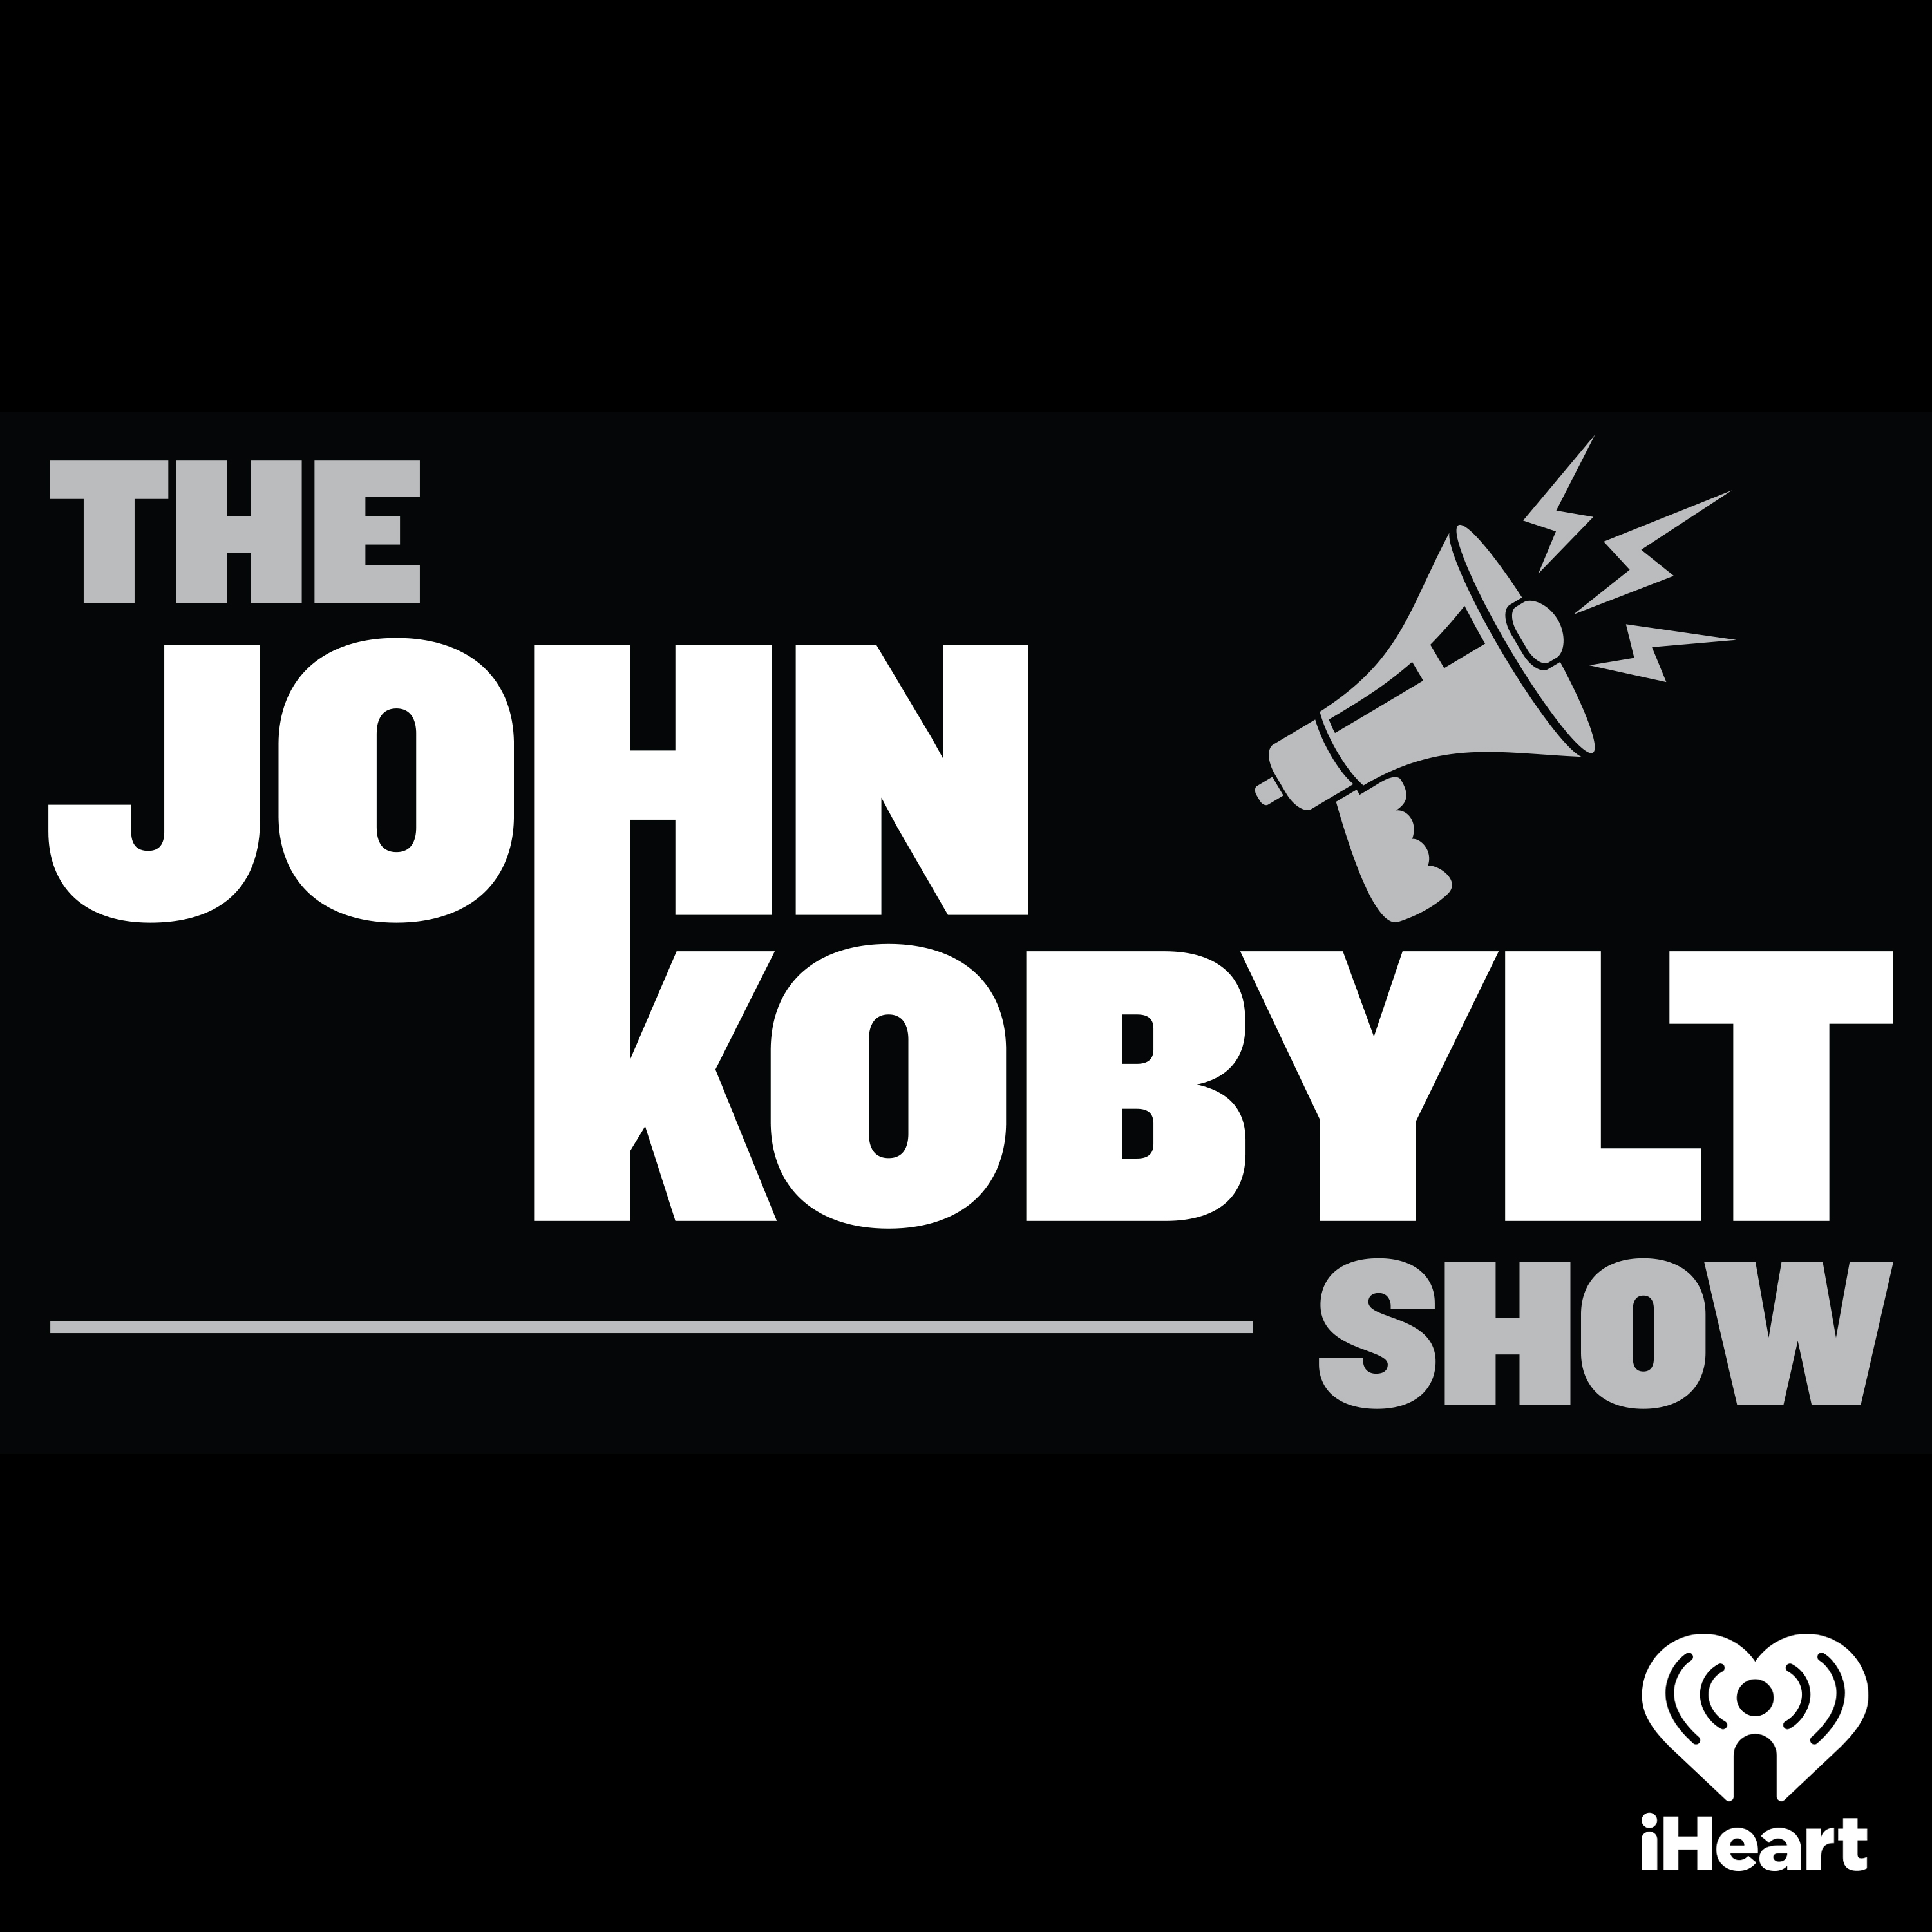 The John Kobylt Show Hour 2 (07/08) - Parkinson's Doctor Visited the White House